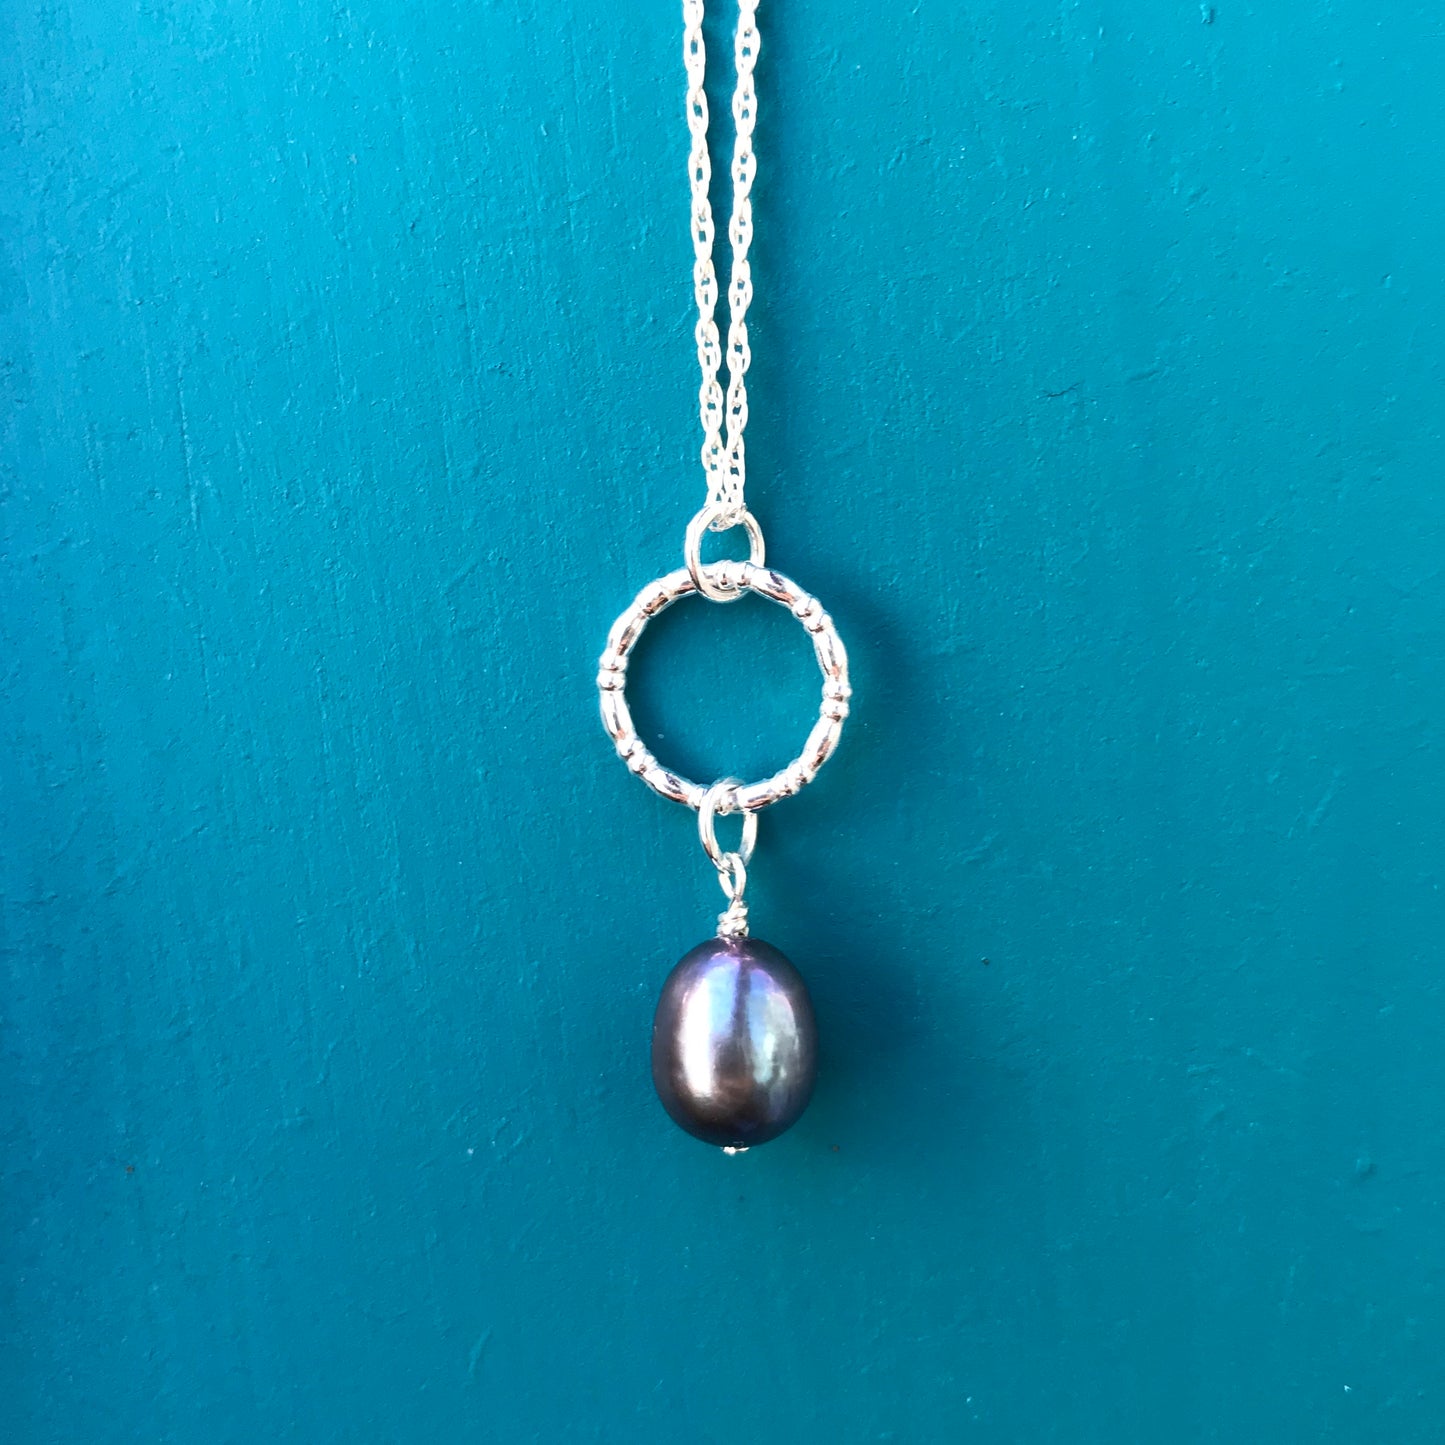 Circle Pendant with Pearl Drop